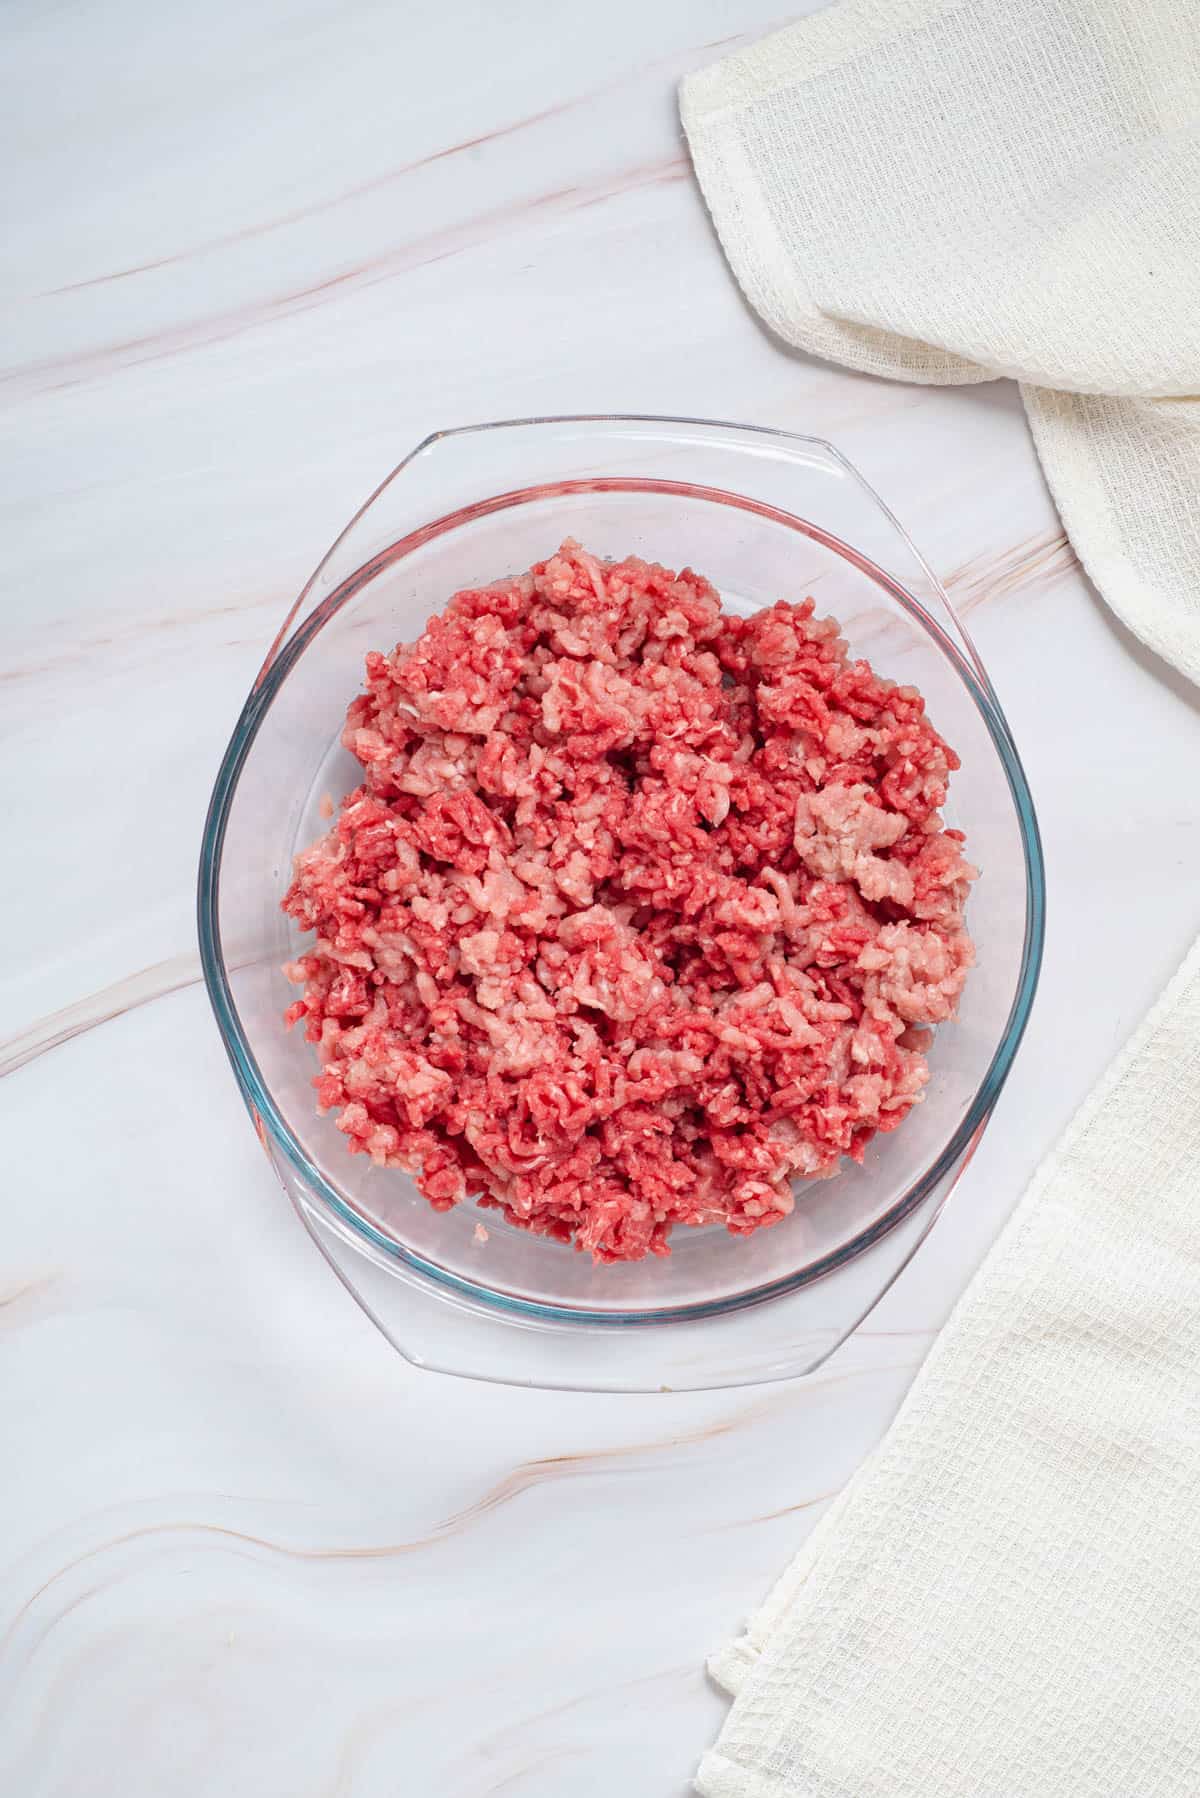 Combining ground pork and ground beef in a large glass bowl for meatballs.